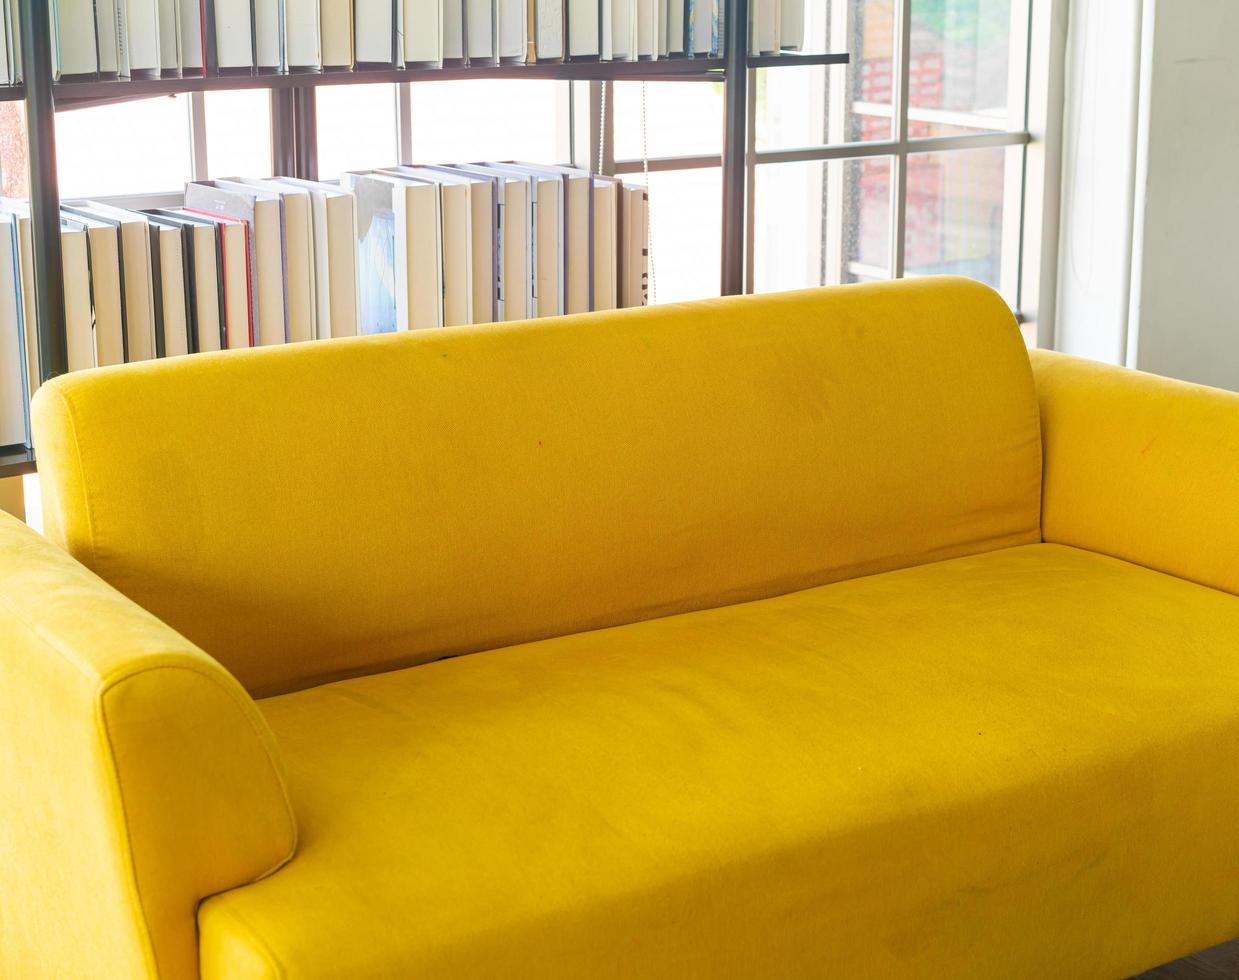 empty yellow sofa decoration in a room photo